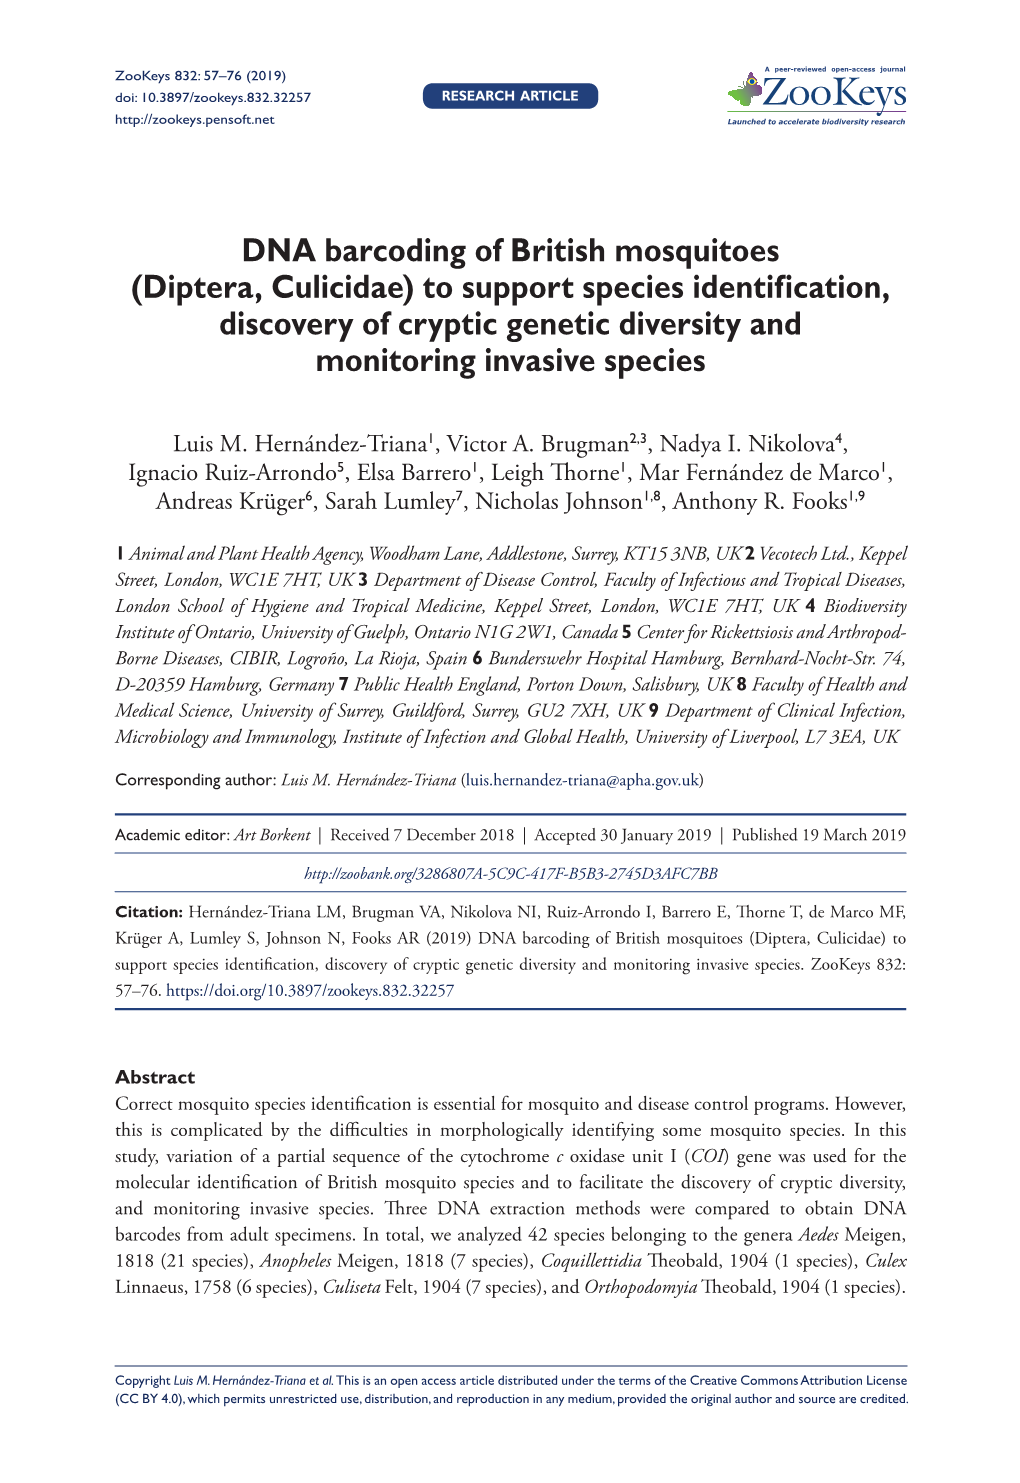 DNA Barcoding of British Mosquitoes (Diptera, Culicidae) to Support Species Identification, Discovery of Cryptic Genetic Diversity and Monitoring Invasive Species